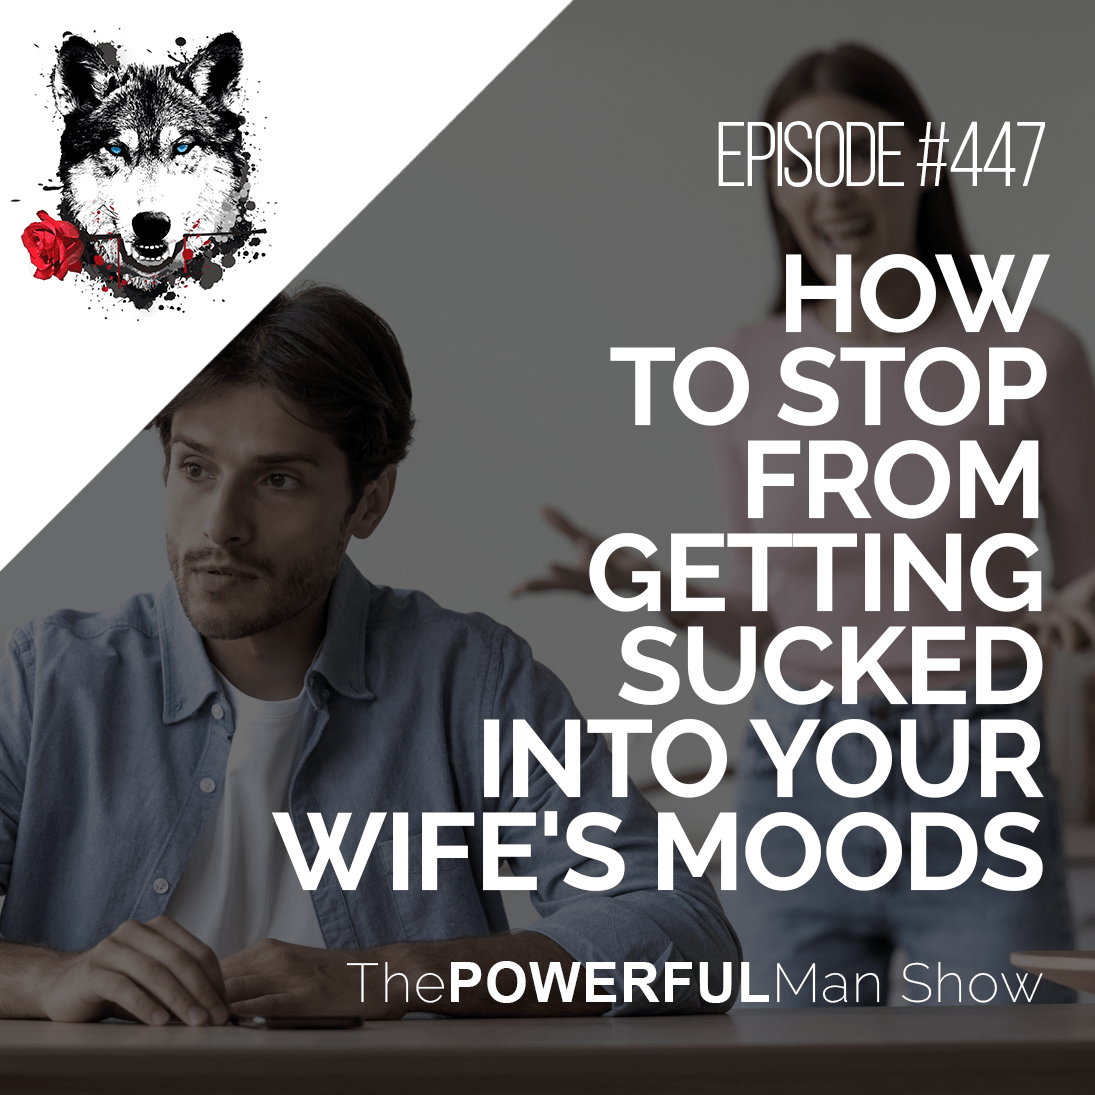 How To Stop From Getting Sucked Into Your Wife's Moods